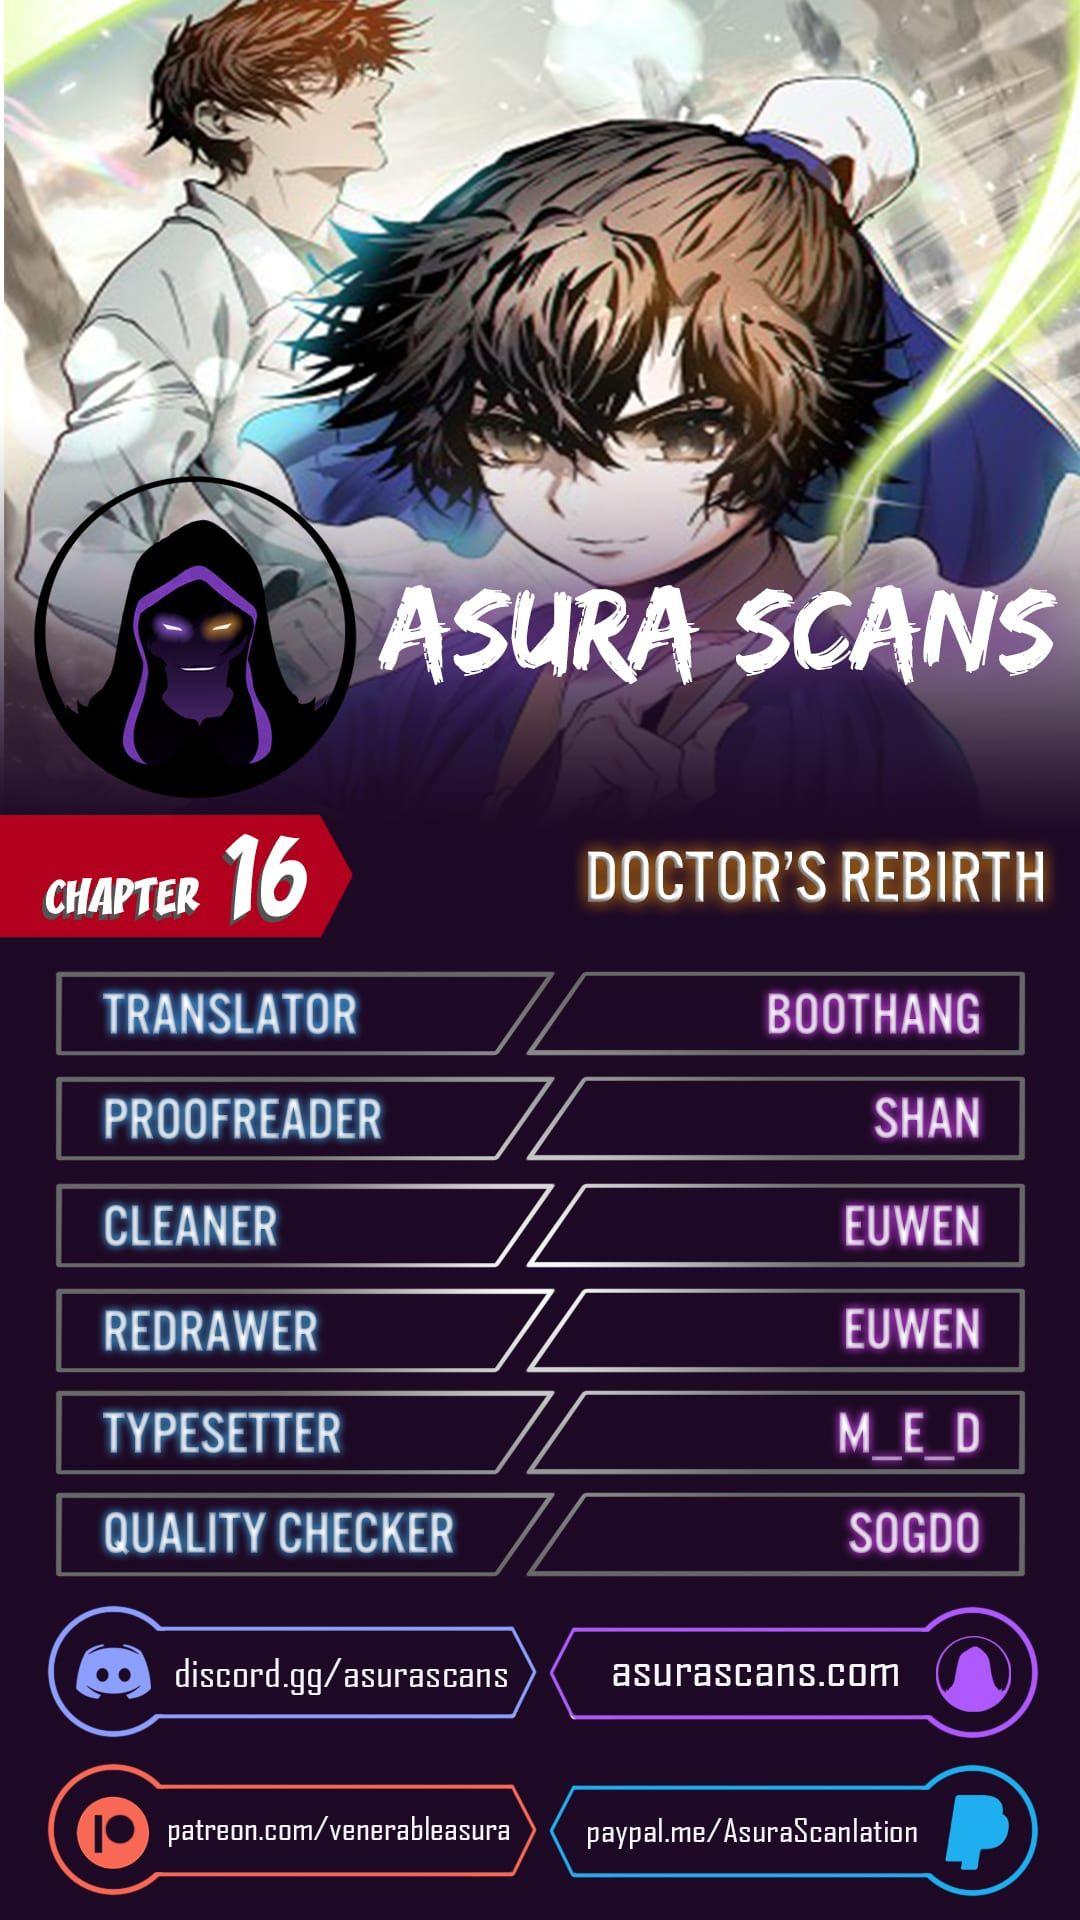 rebirth of immortal emperor ] first time seeing asura scans having